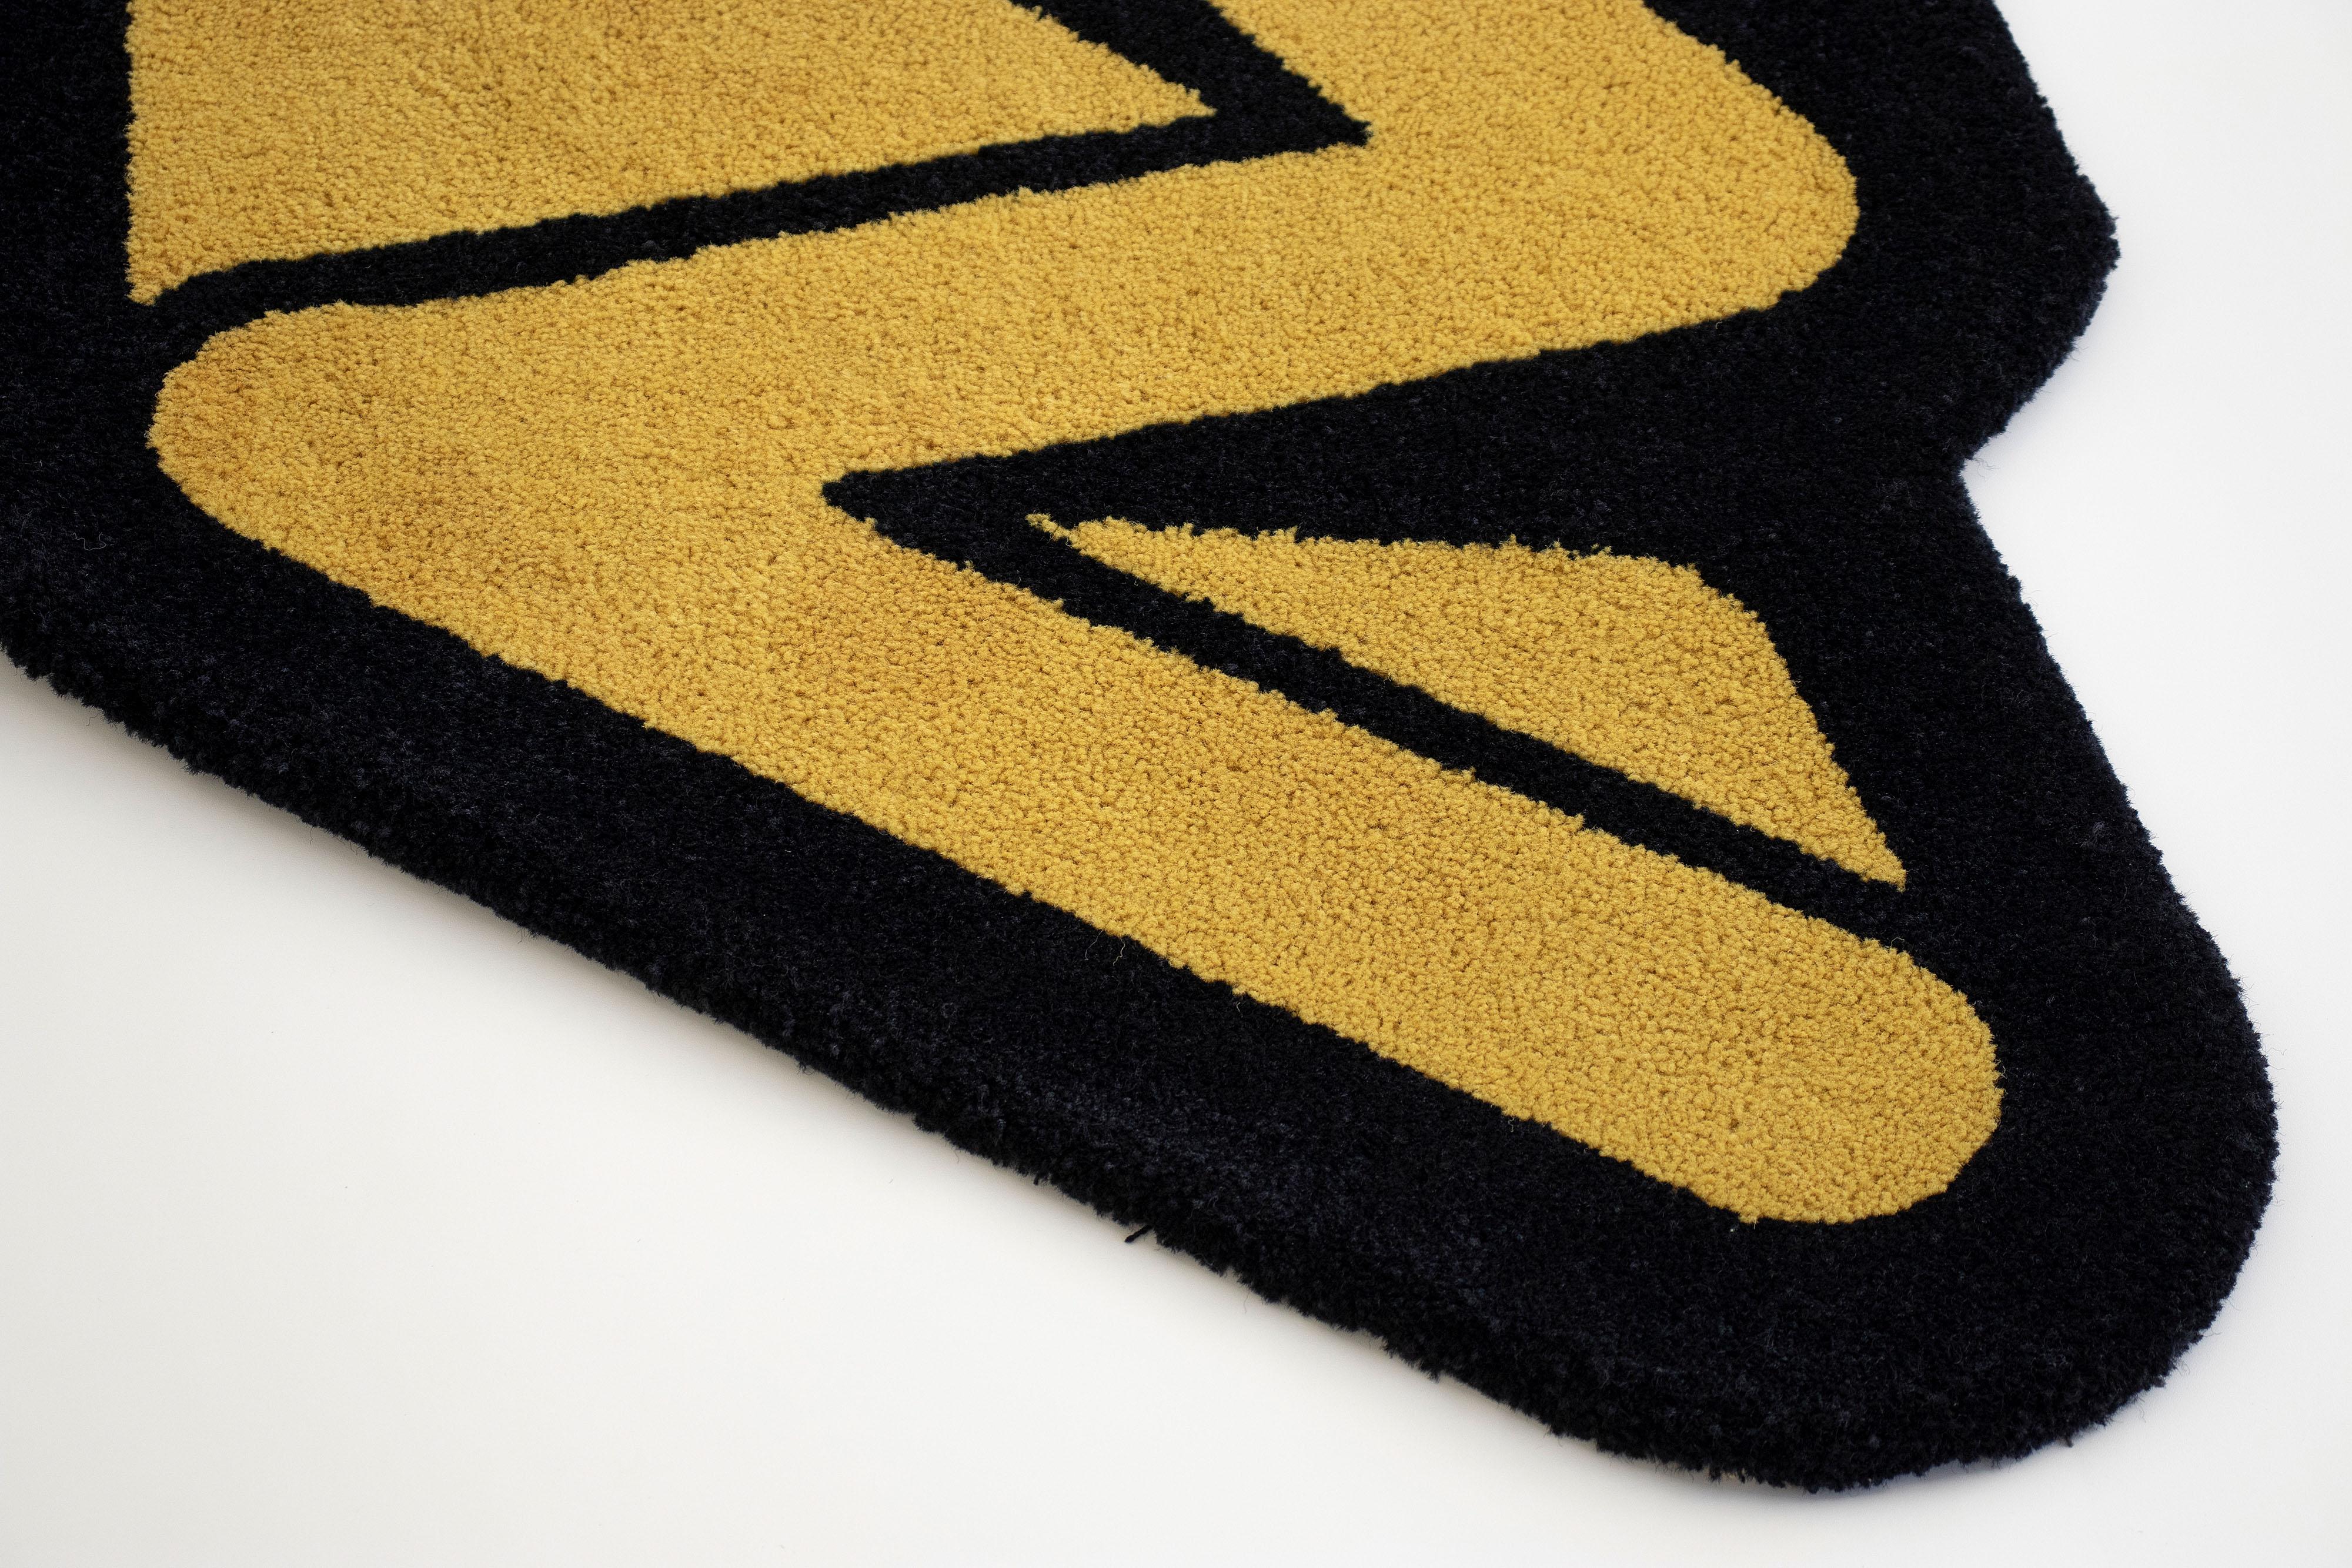 Playful Yellow Zigzag Runner Rug from Graffiti Collection by Paulo Kobylka 2